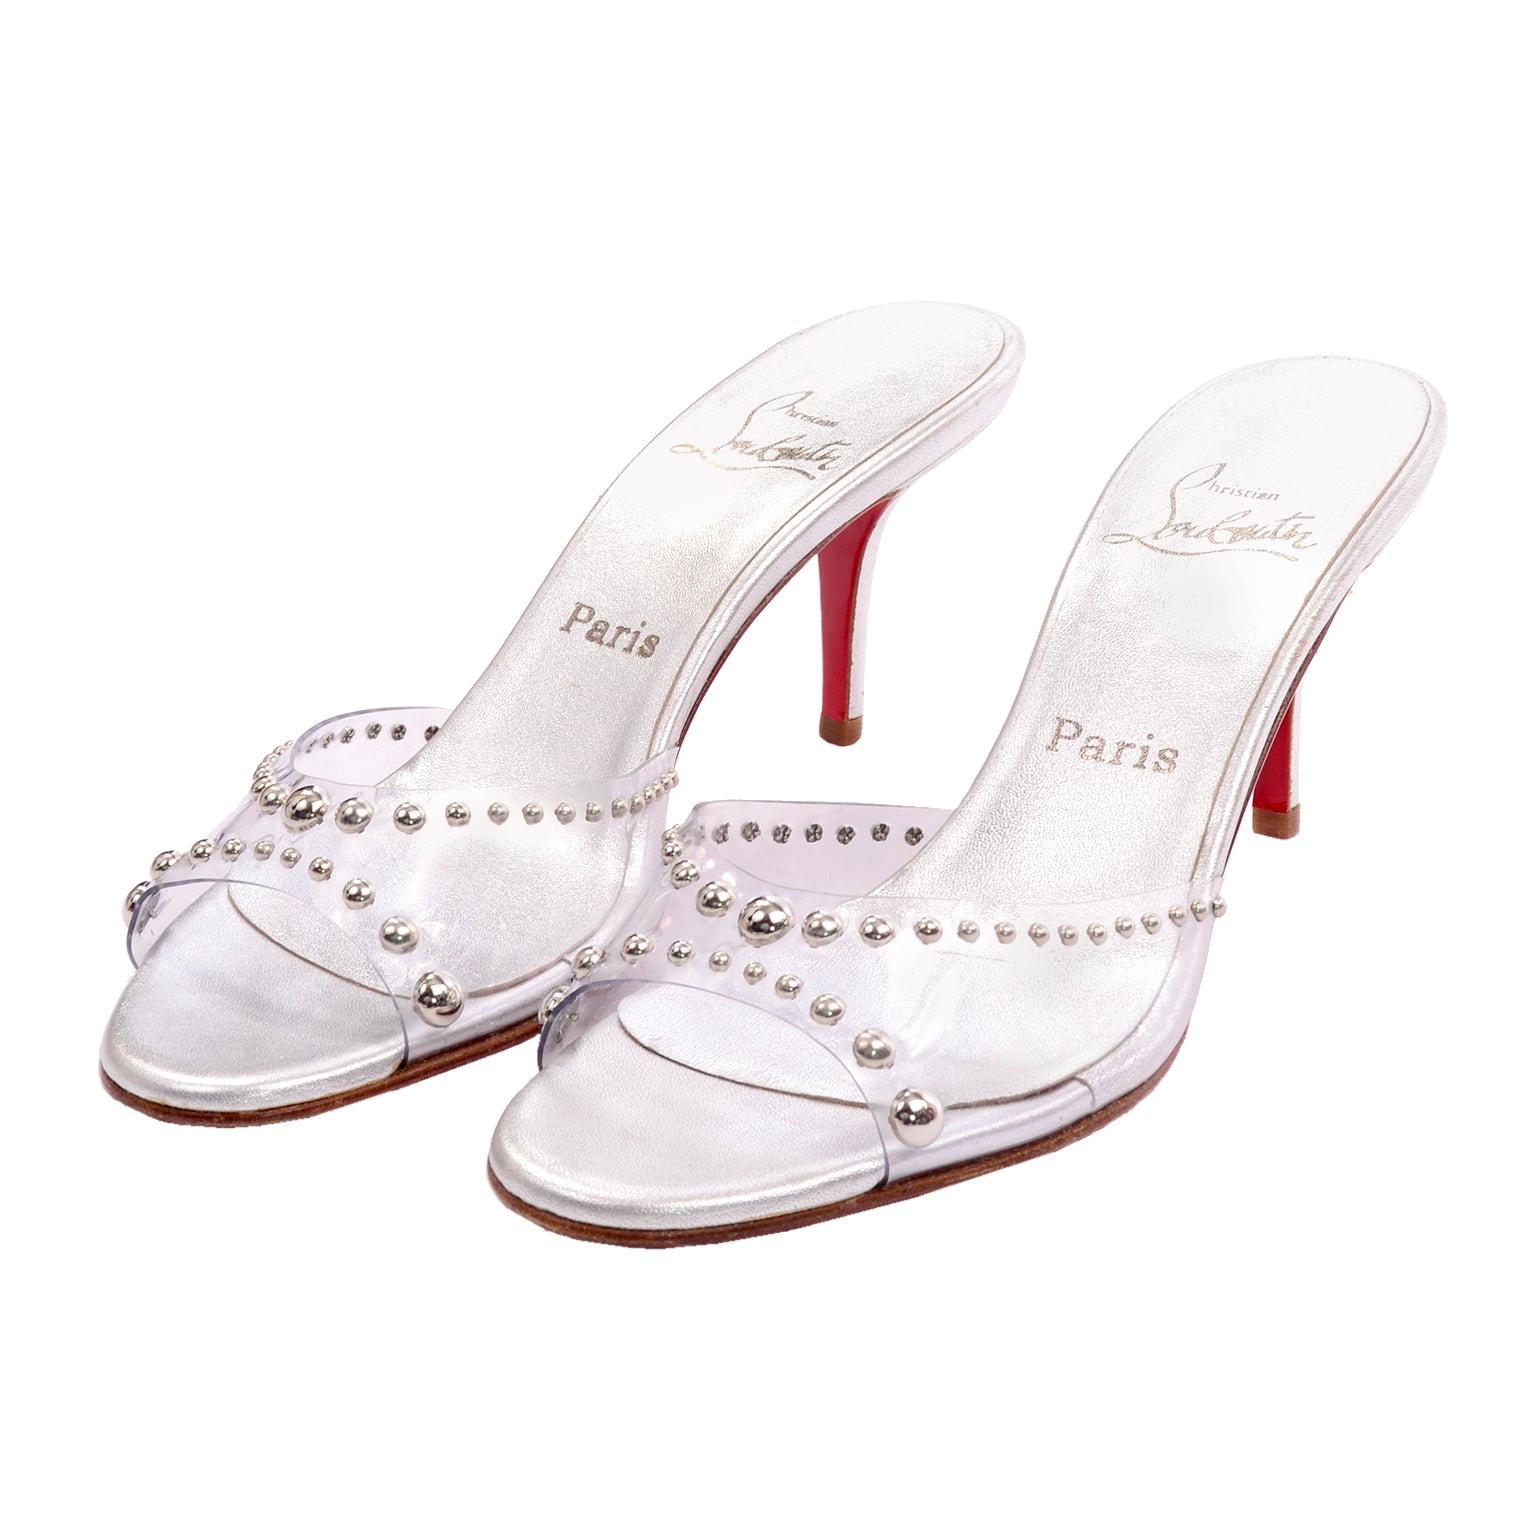 Never Worn Christian Louboutin Shoes Clear Open Toe Slides w Silver Studs Sz 39